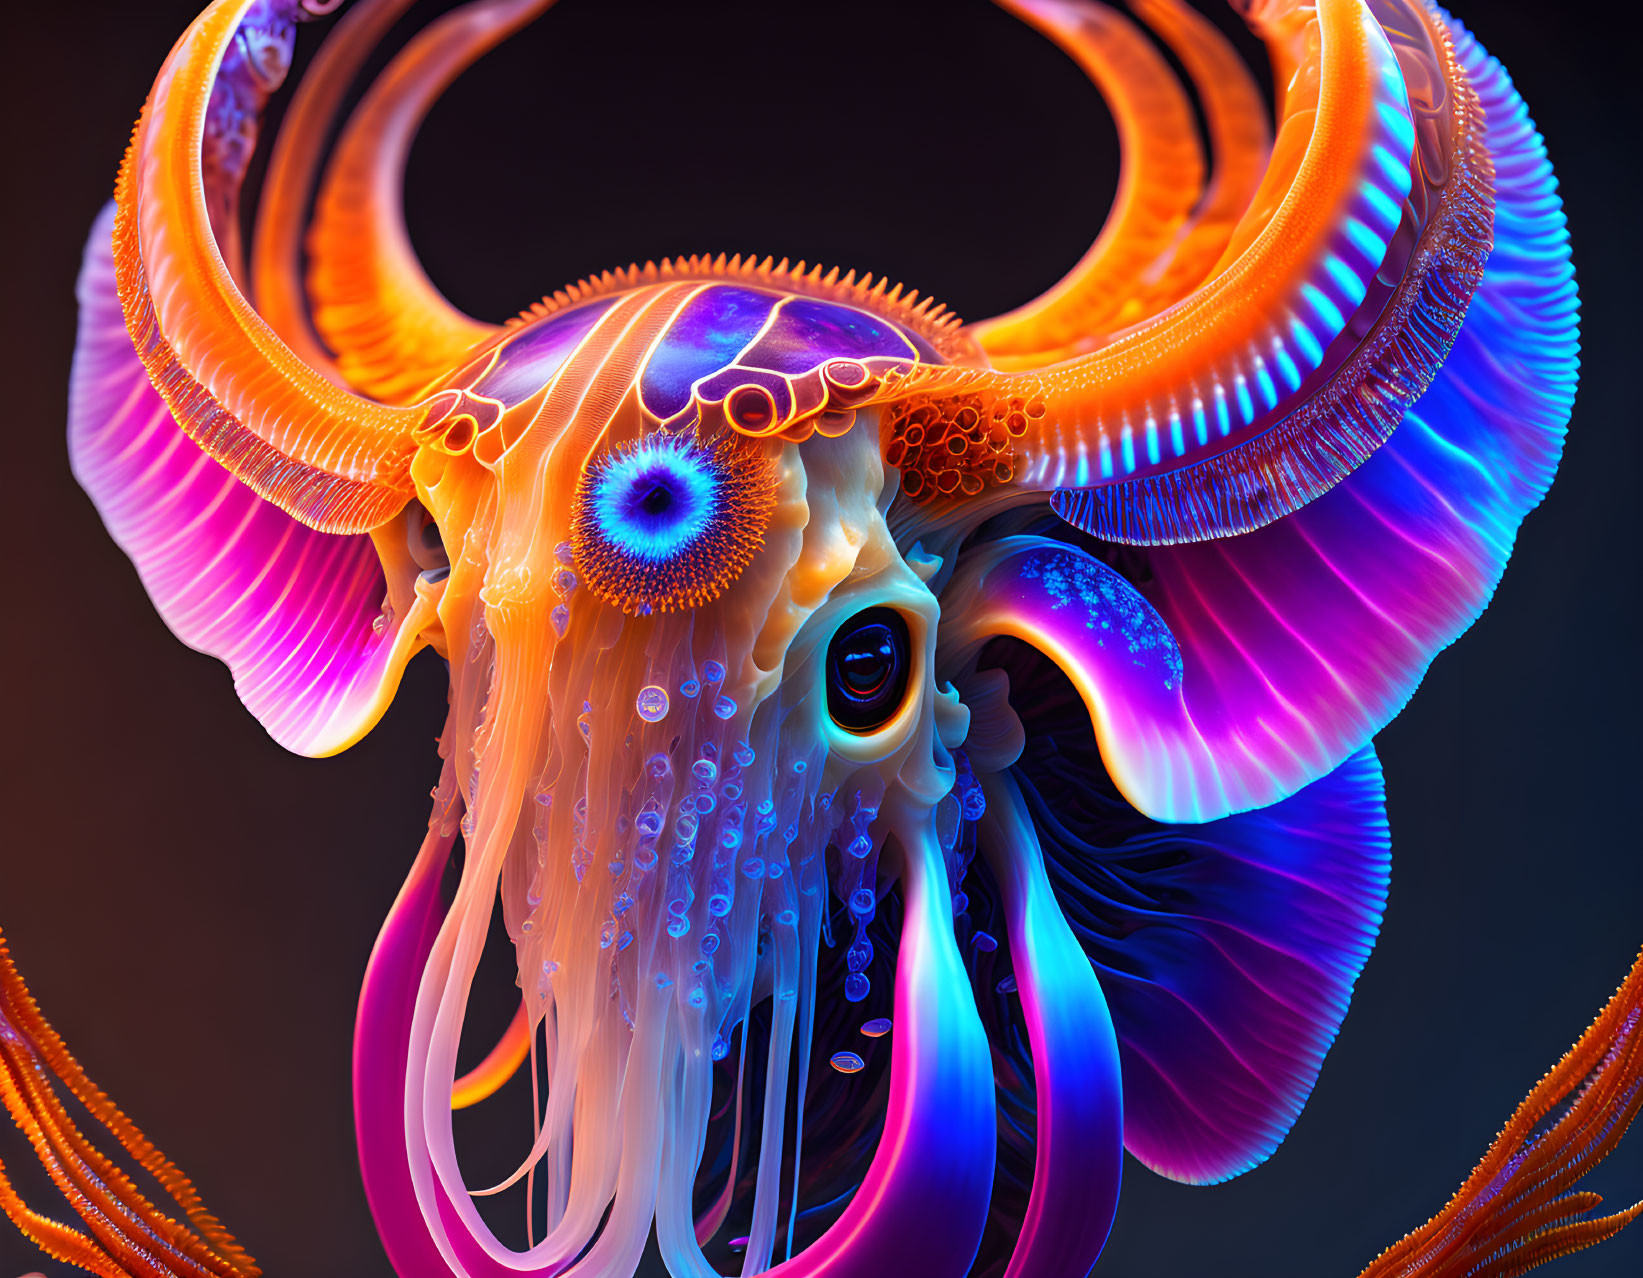 Colorful digital artwork of fantastical octopus-like creature with intricate horns and one eye